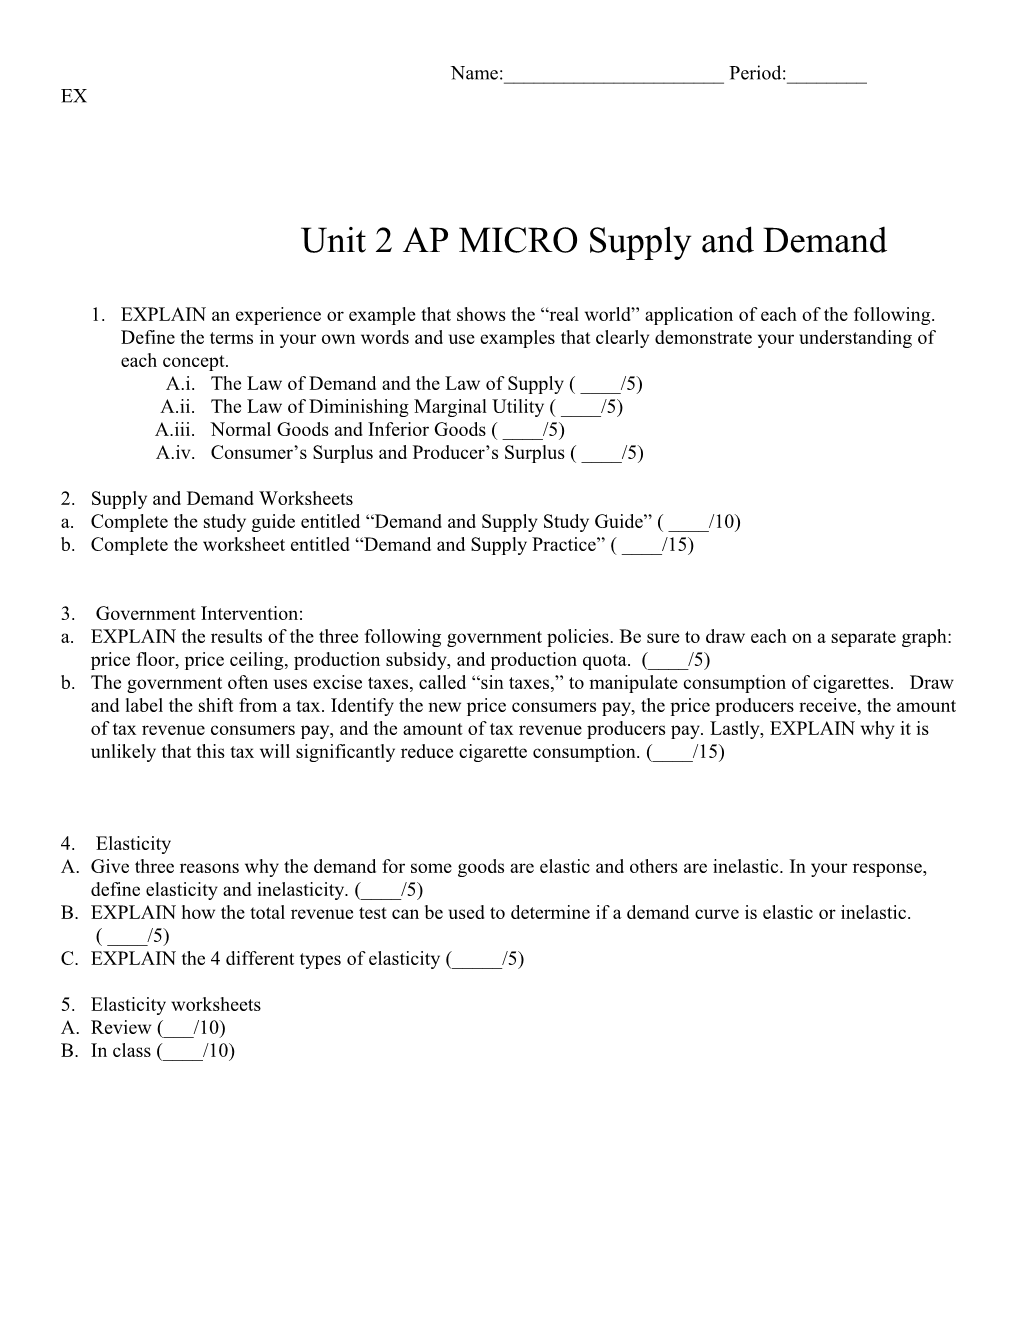 Unit 2 AP MICRO Supply and Demand